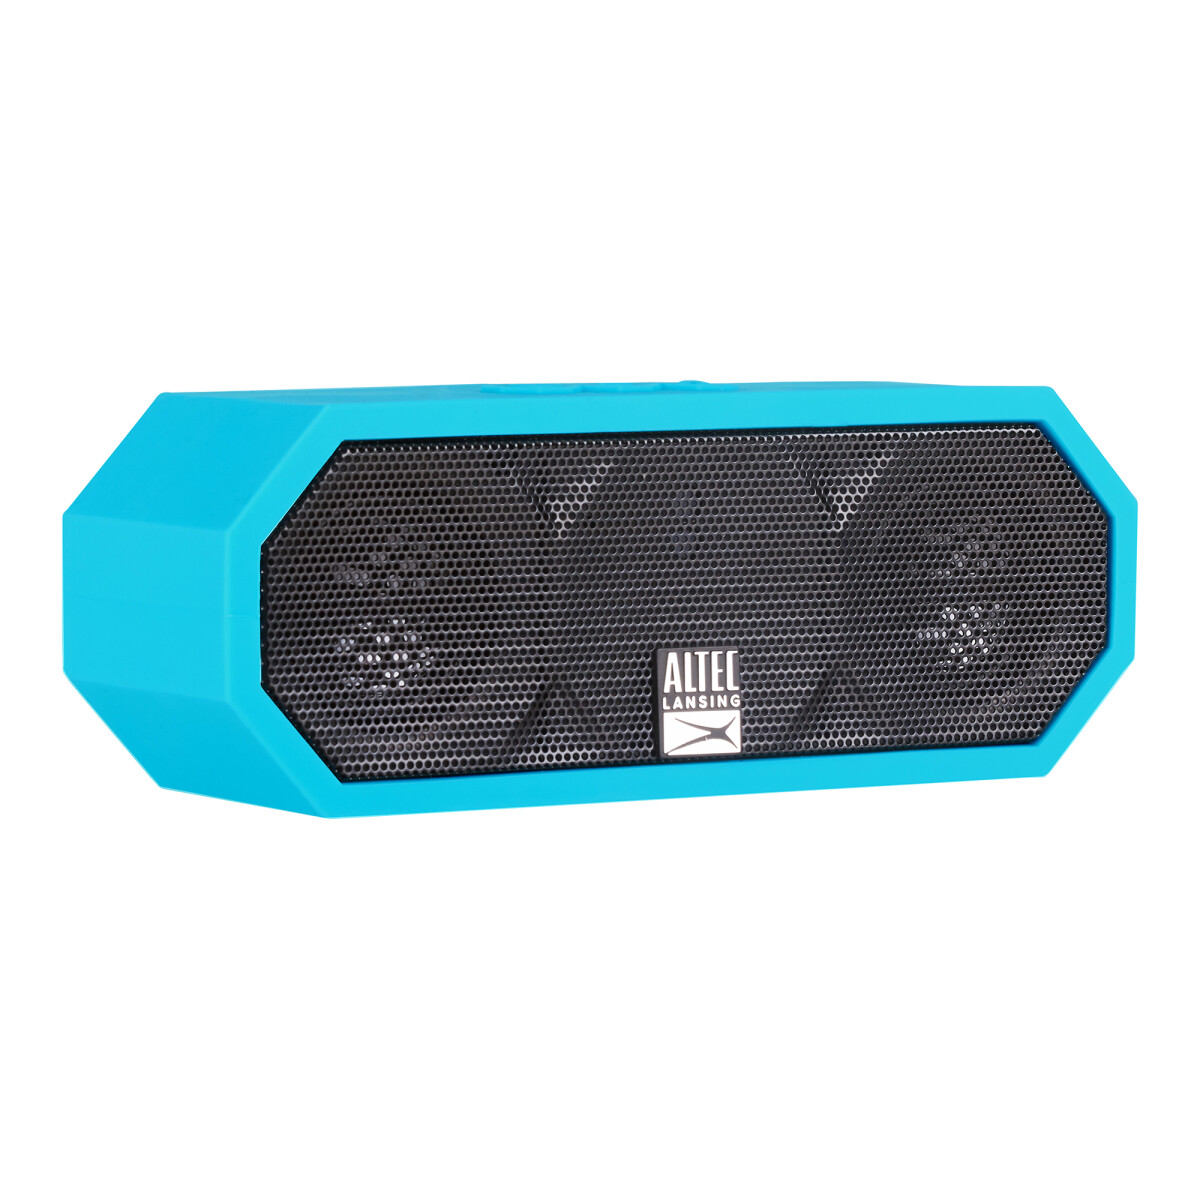 Altec Lansing - Parlante Jacket H20 3 - Ultra Compacto. IP67. Microfono. Bluetooth. Alcance: 100 Ft. - 001 